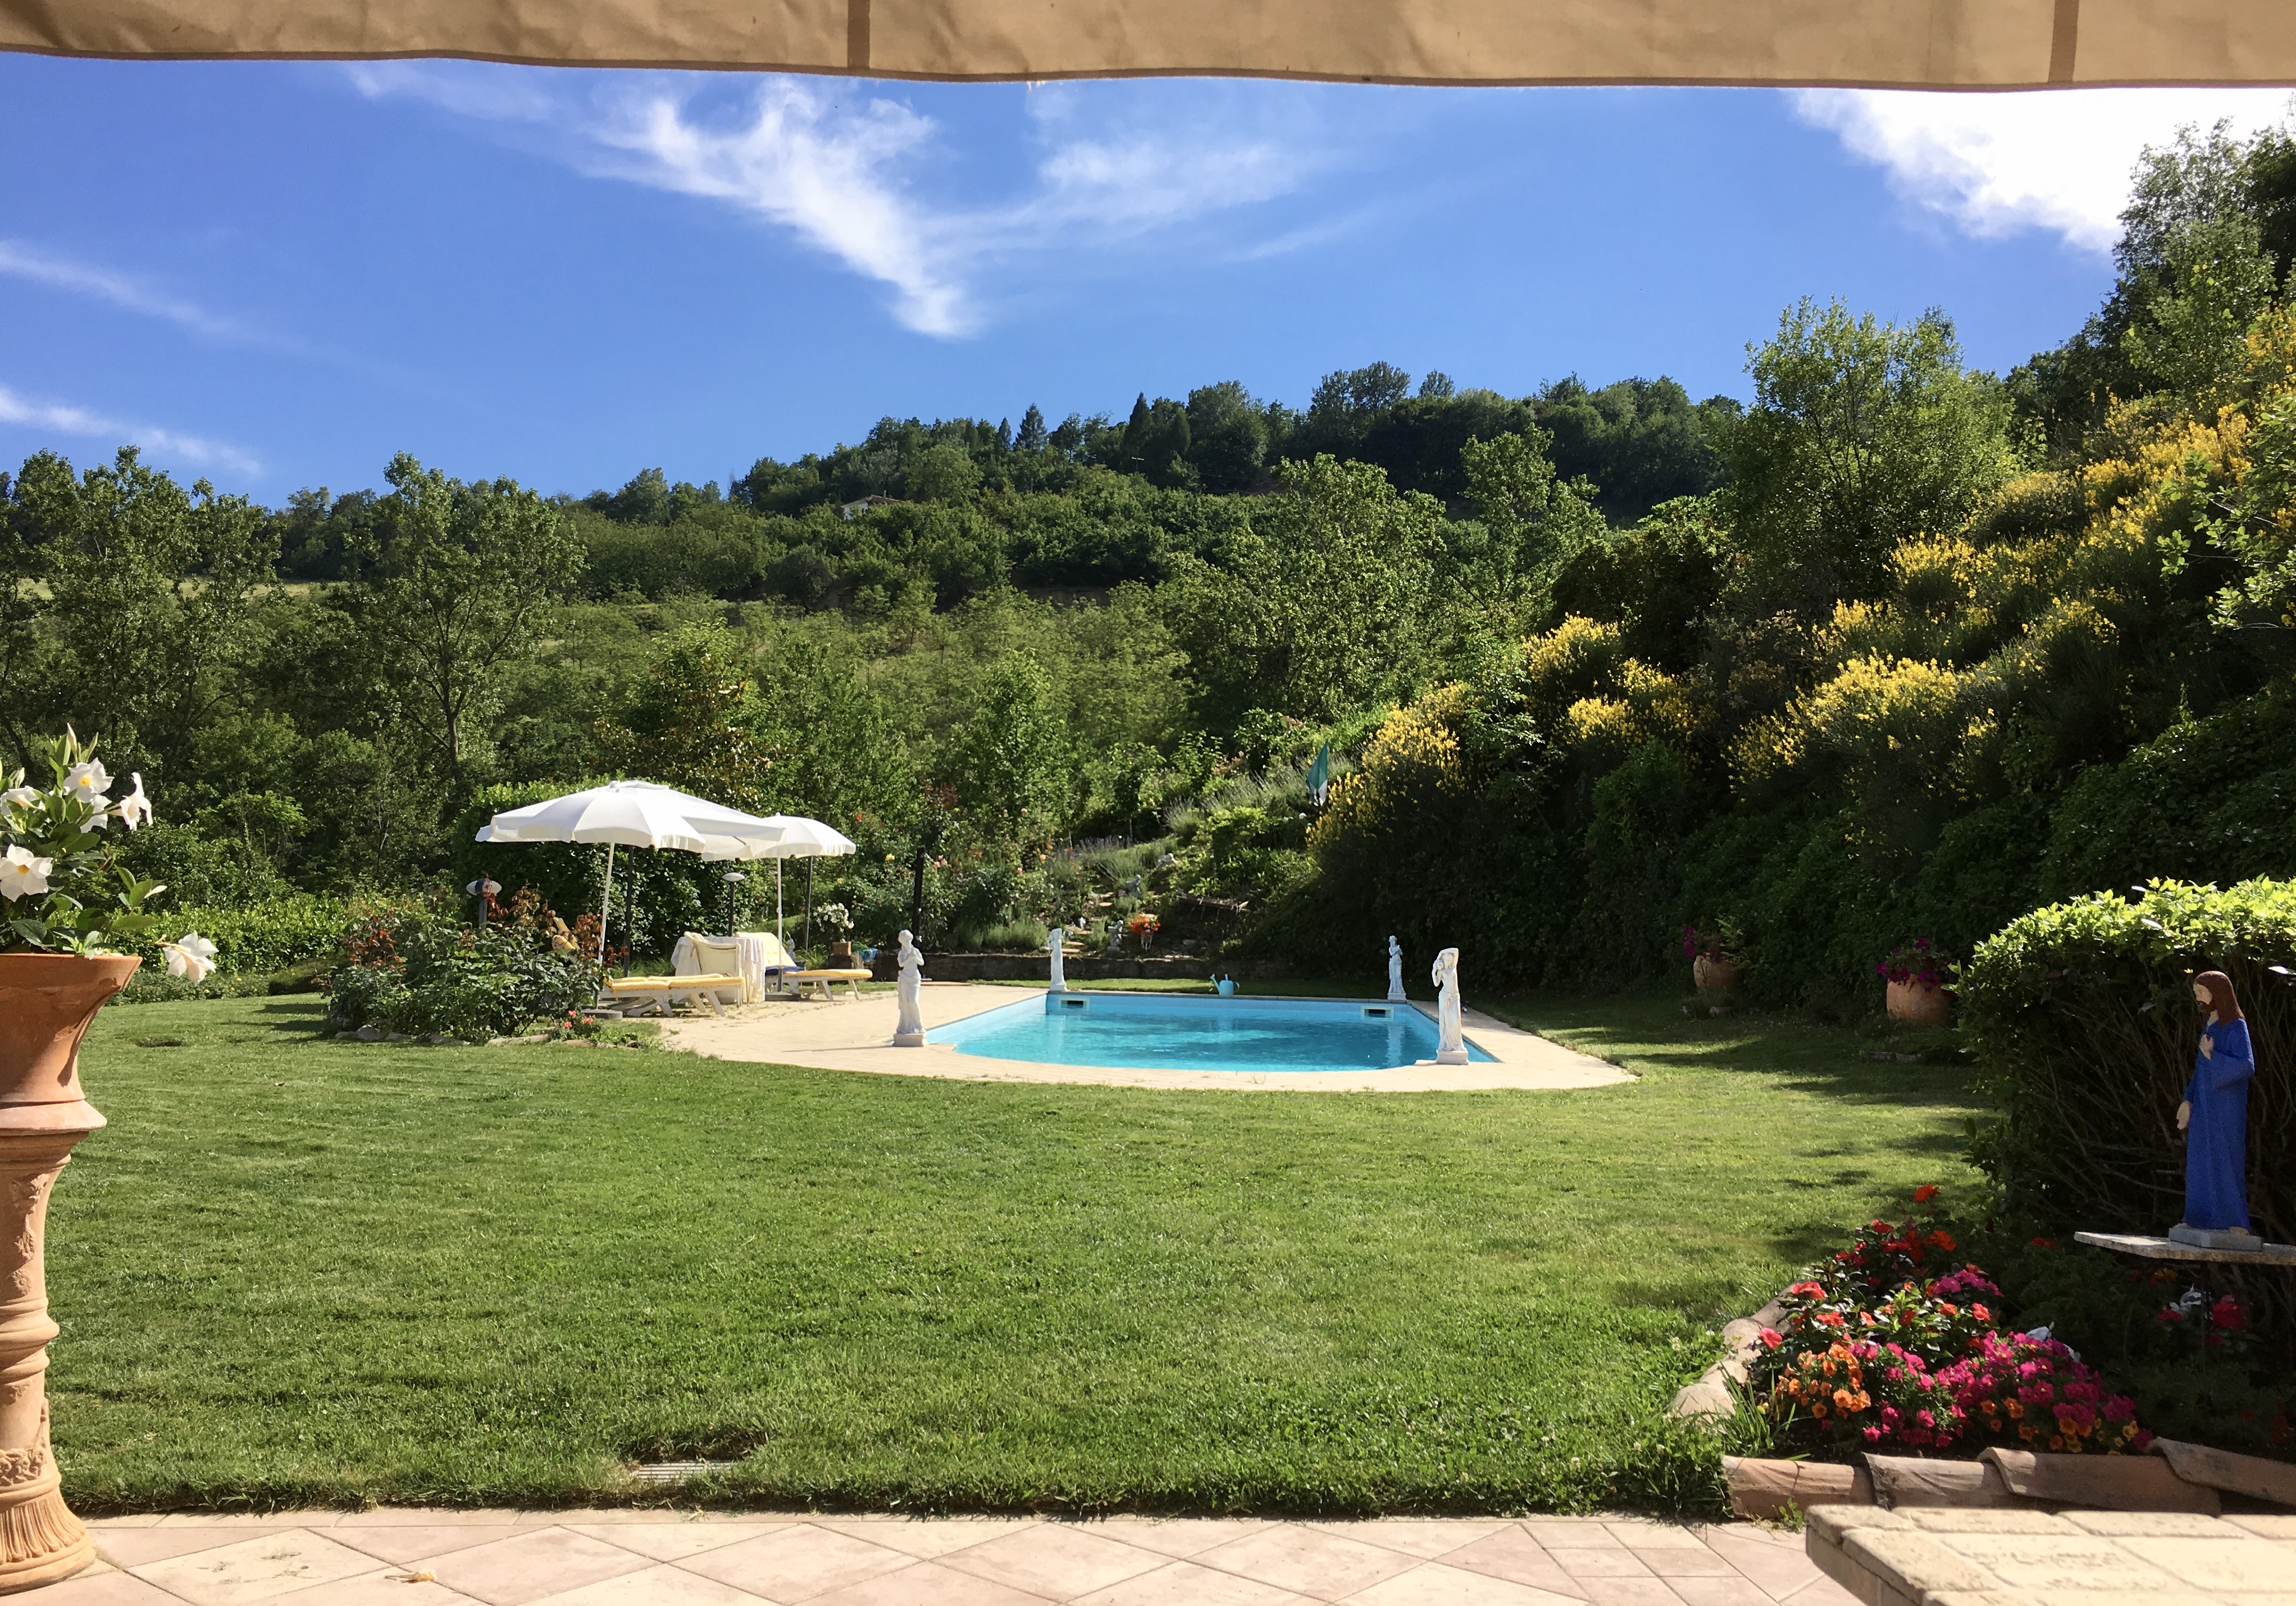 pools, papillons and piemonte – with Gigi and Gastone